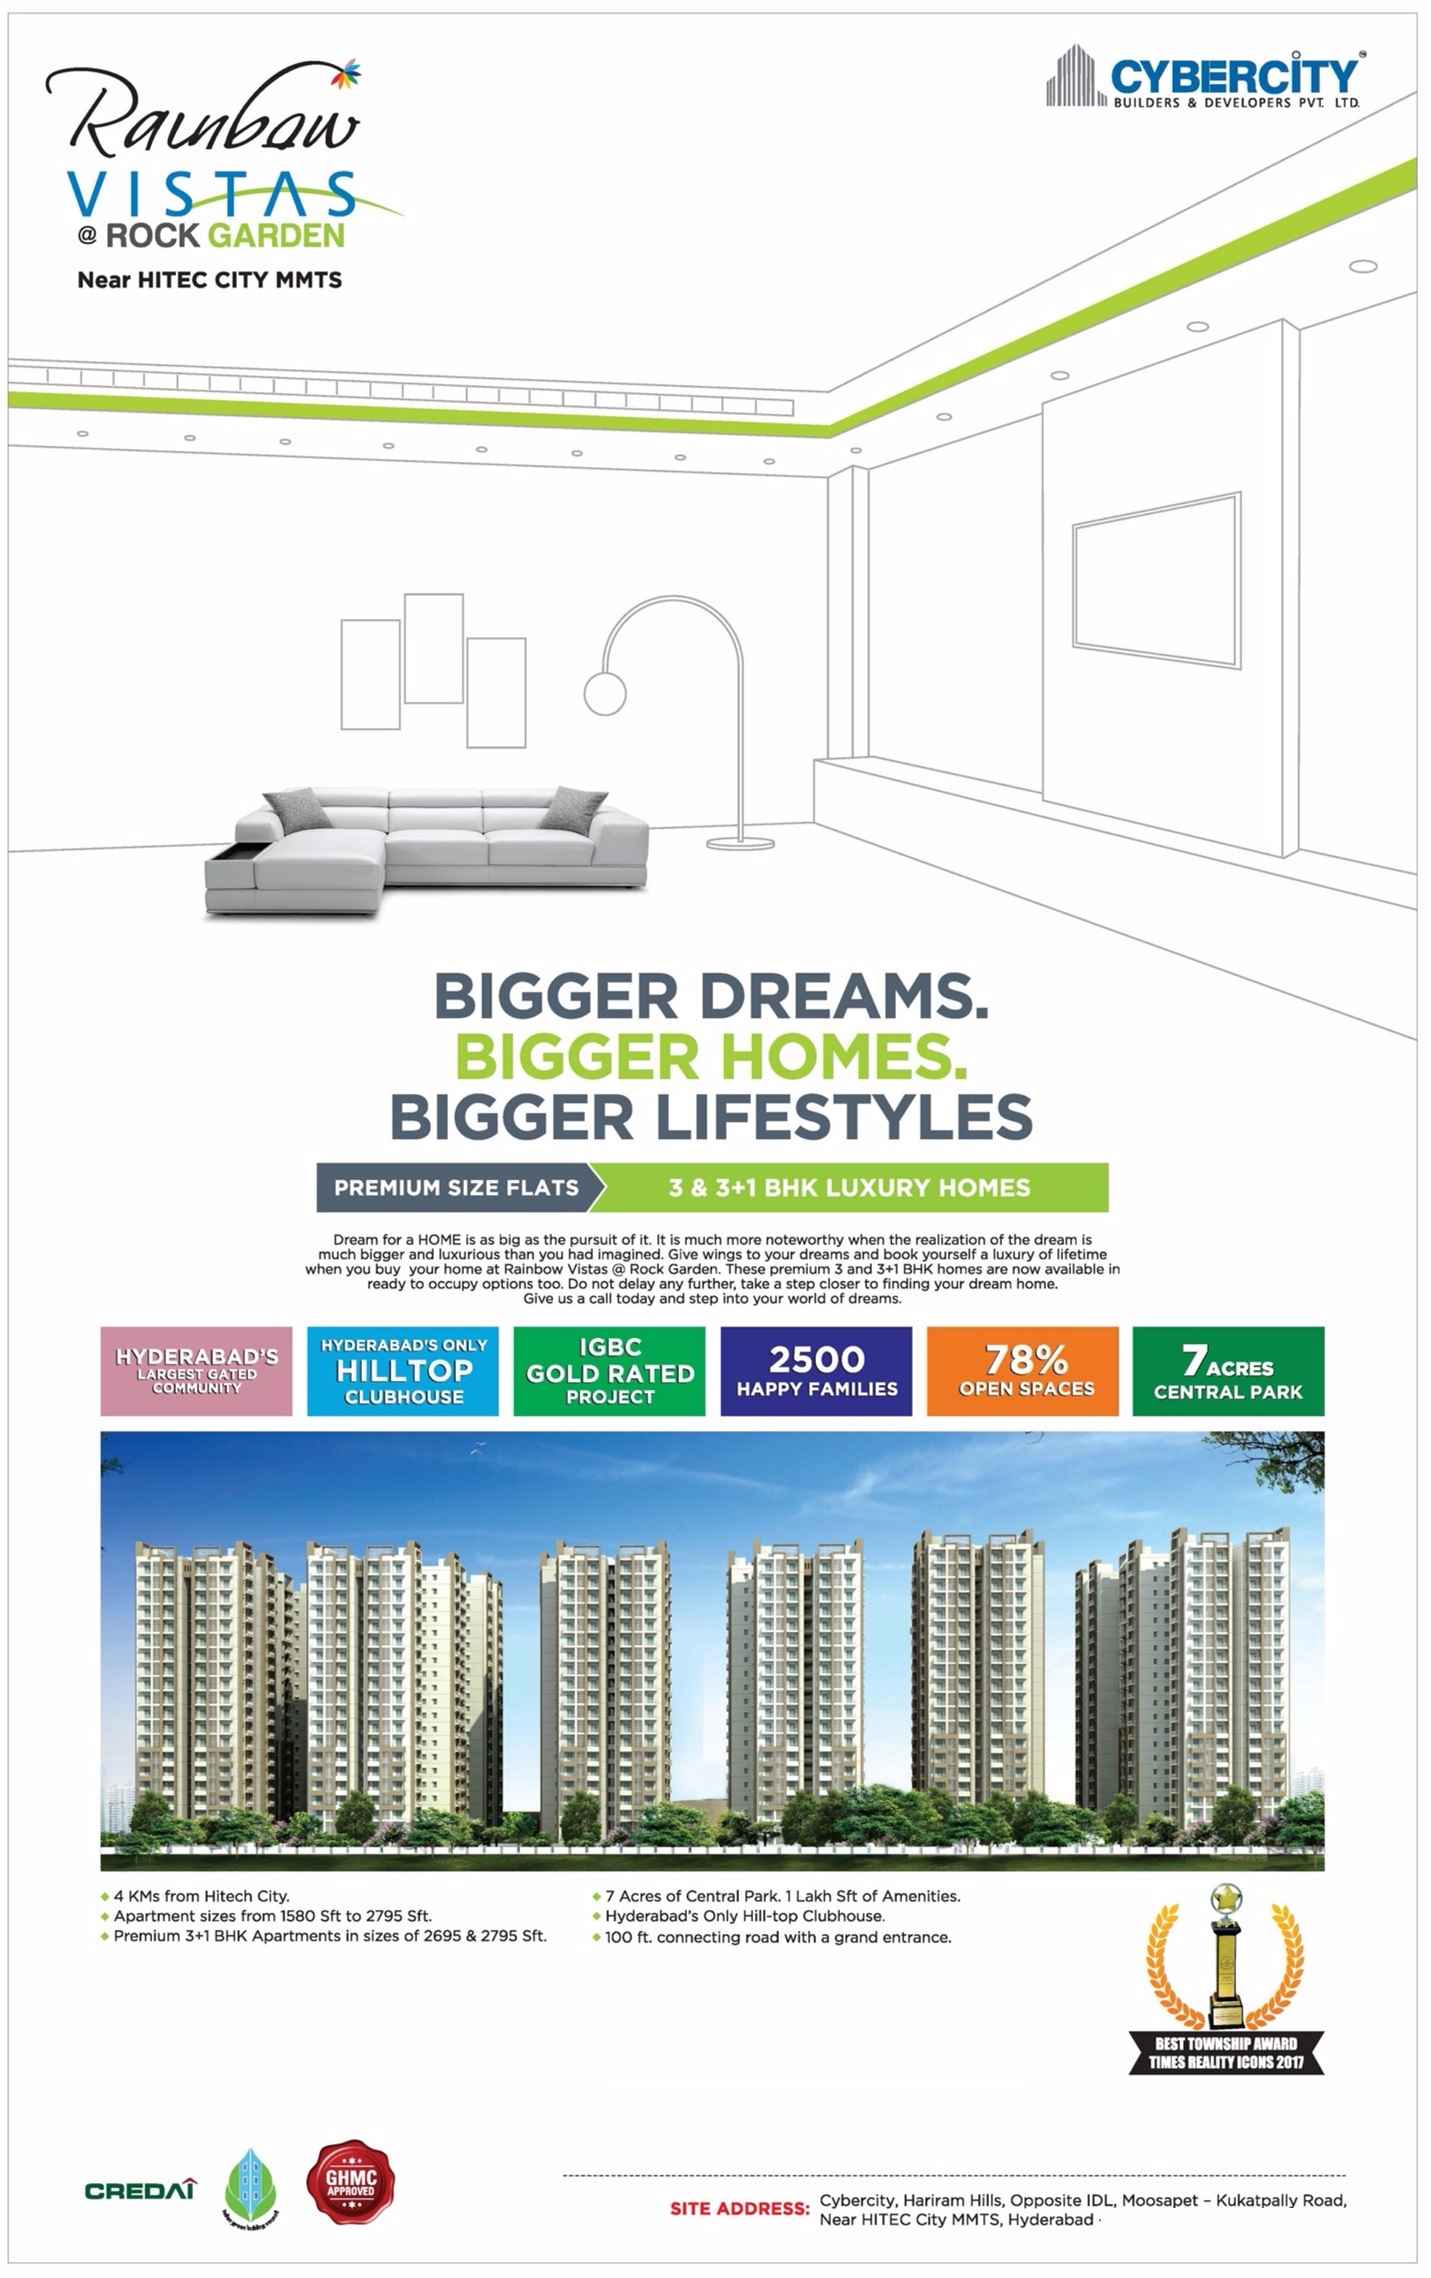 Bigger dreams with bigger homes and lifestyle at Cybercity Rainbow Vistas in Hyderabad